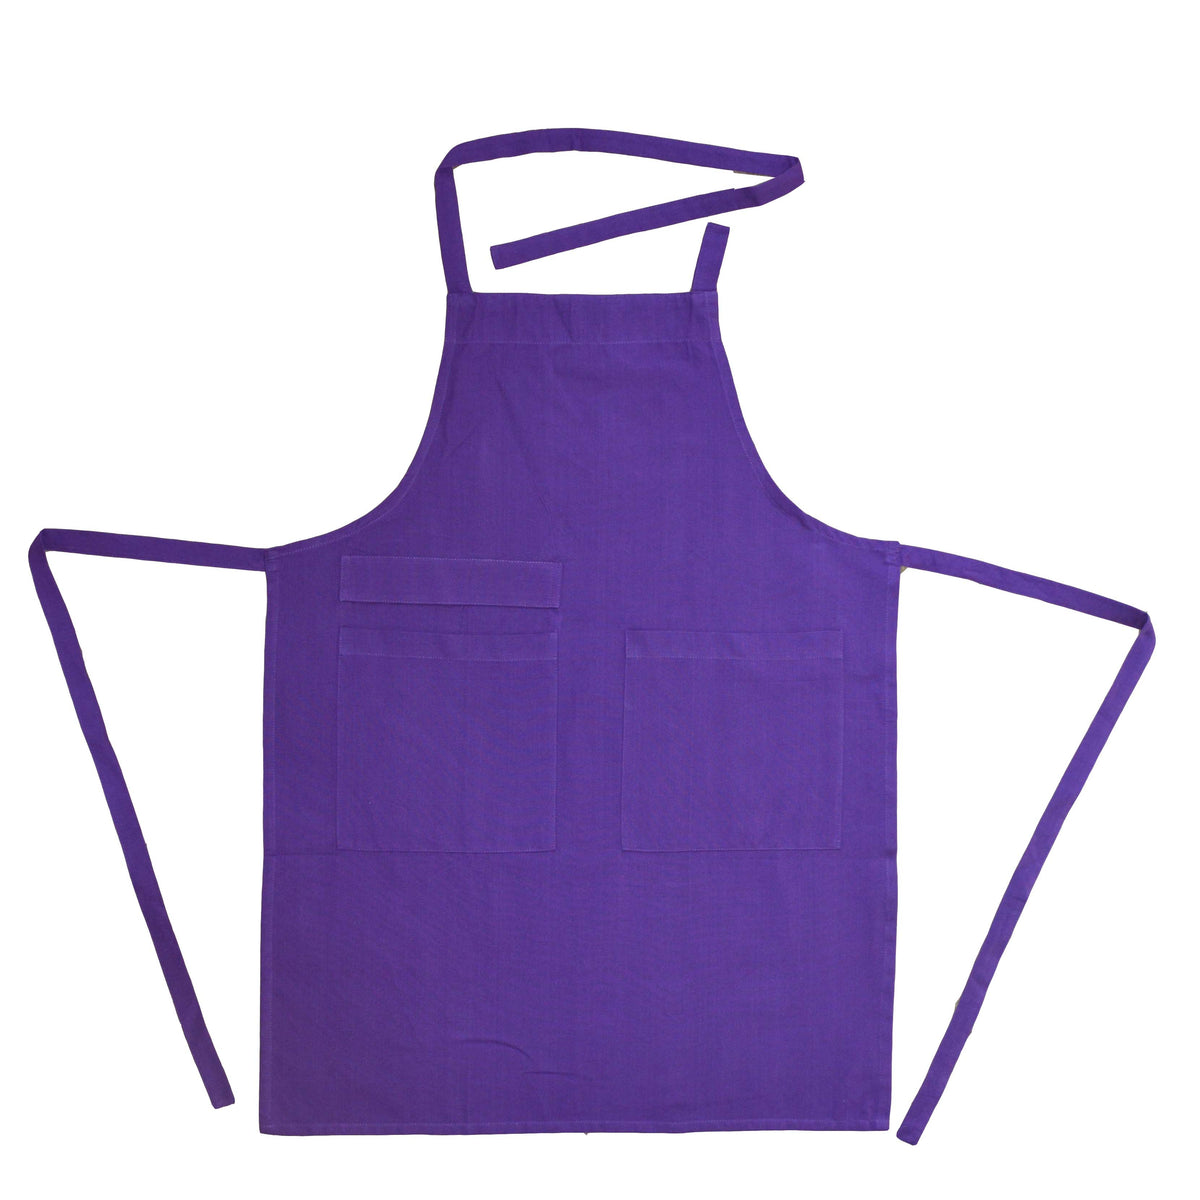 Dunroven House Adult Apron